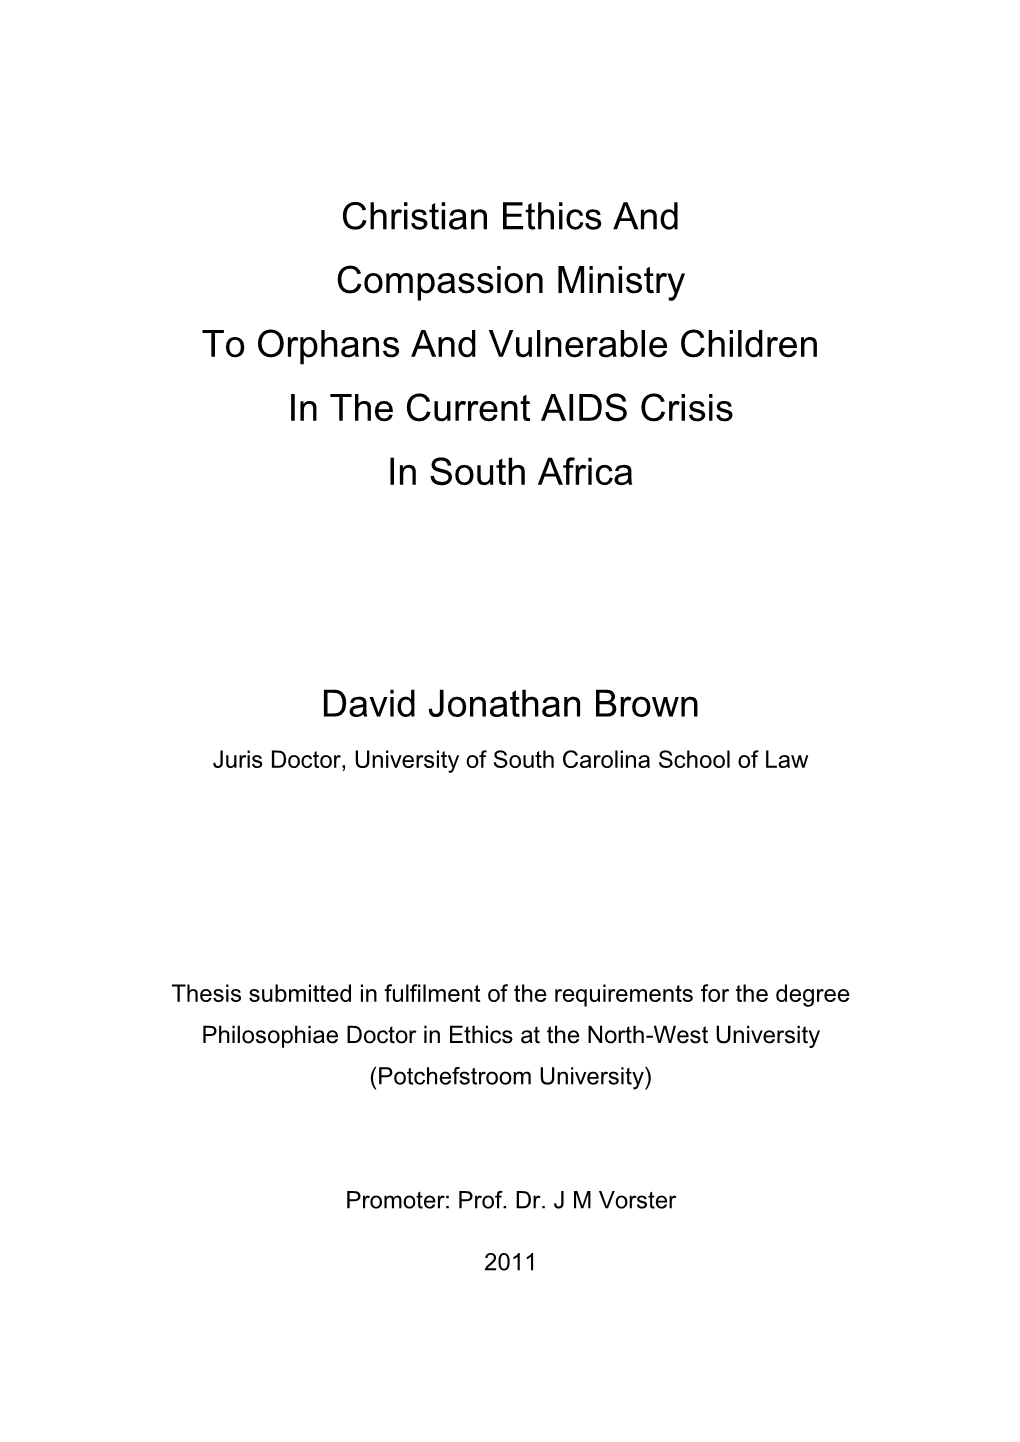 Christian Ethics and Compassion Ministry to Orphans and Vulnerable Children in the Current AIDS Crisis in South Africa